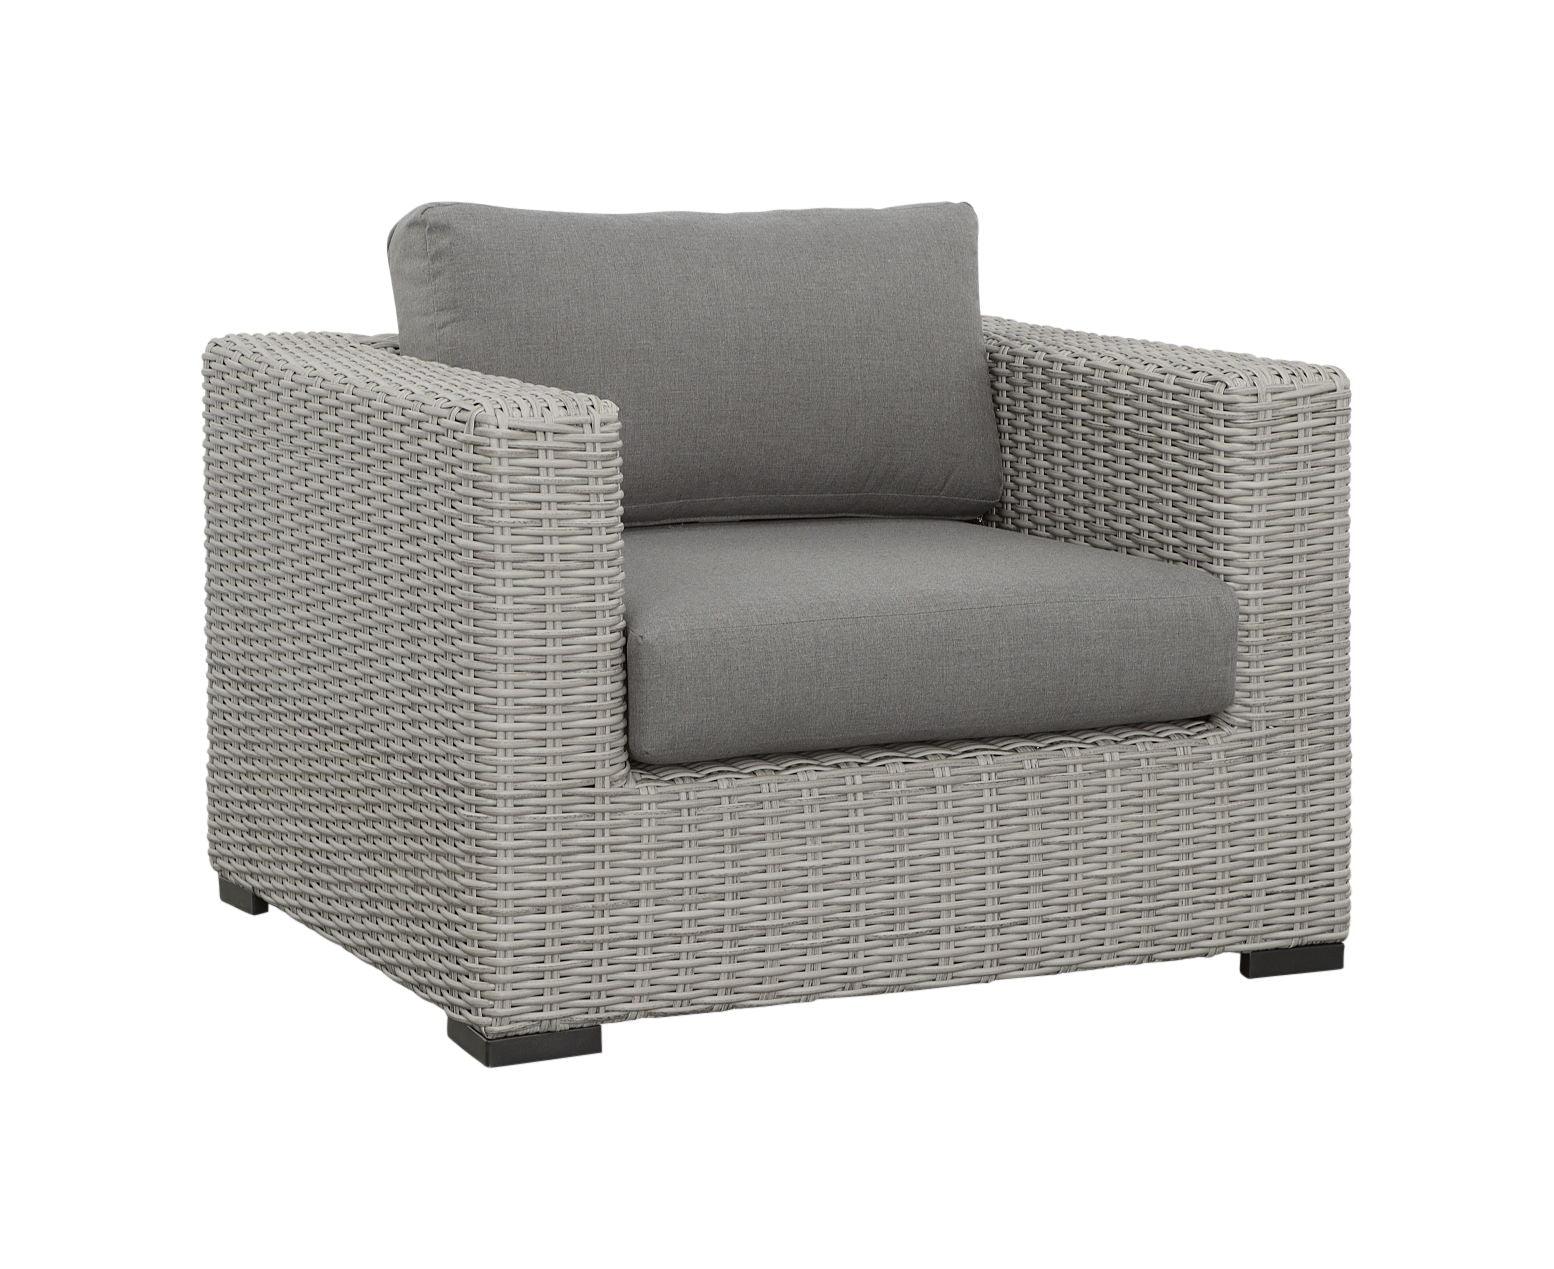 Steve Silver Furniture - Blakley - Outdoor Lounge Chair (Set of 2) With Half-Round Wicker - Gray - 5th Avenue Furniture